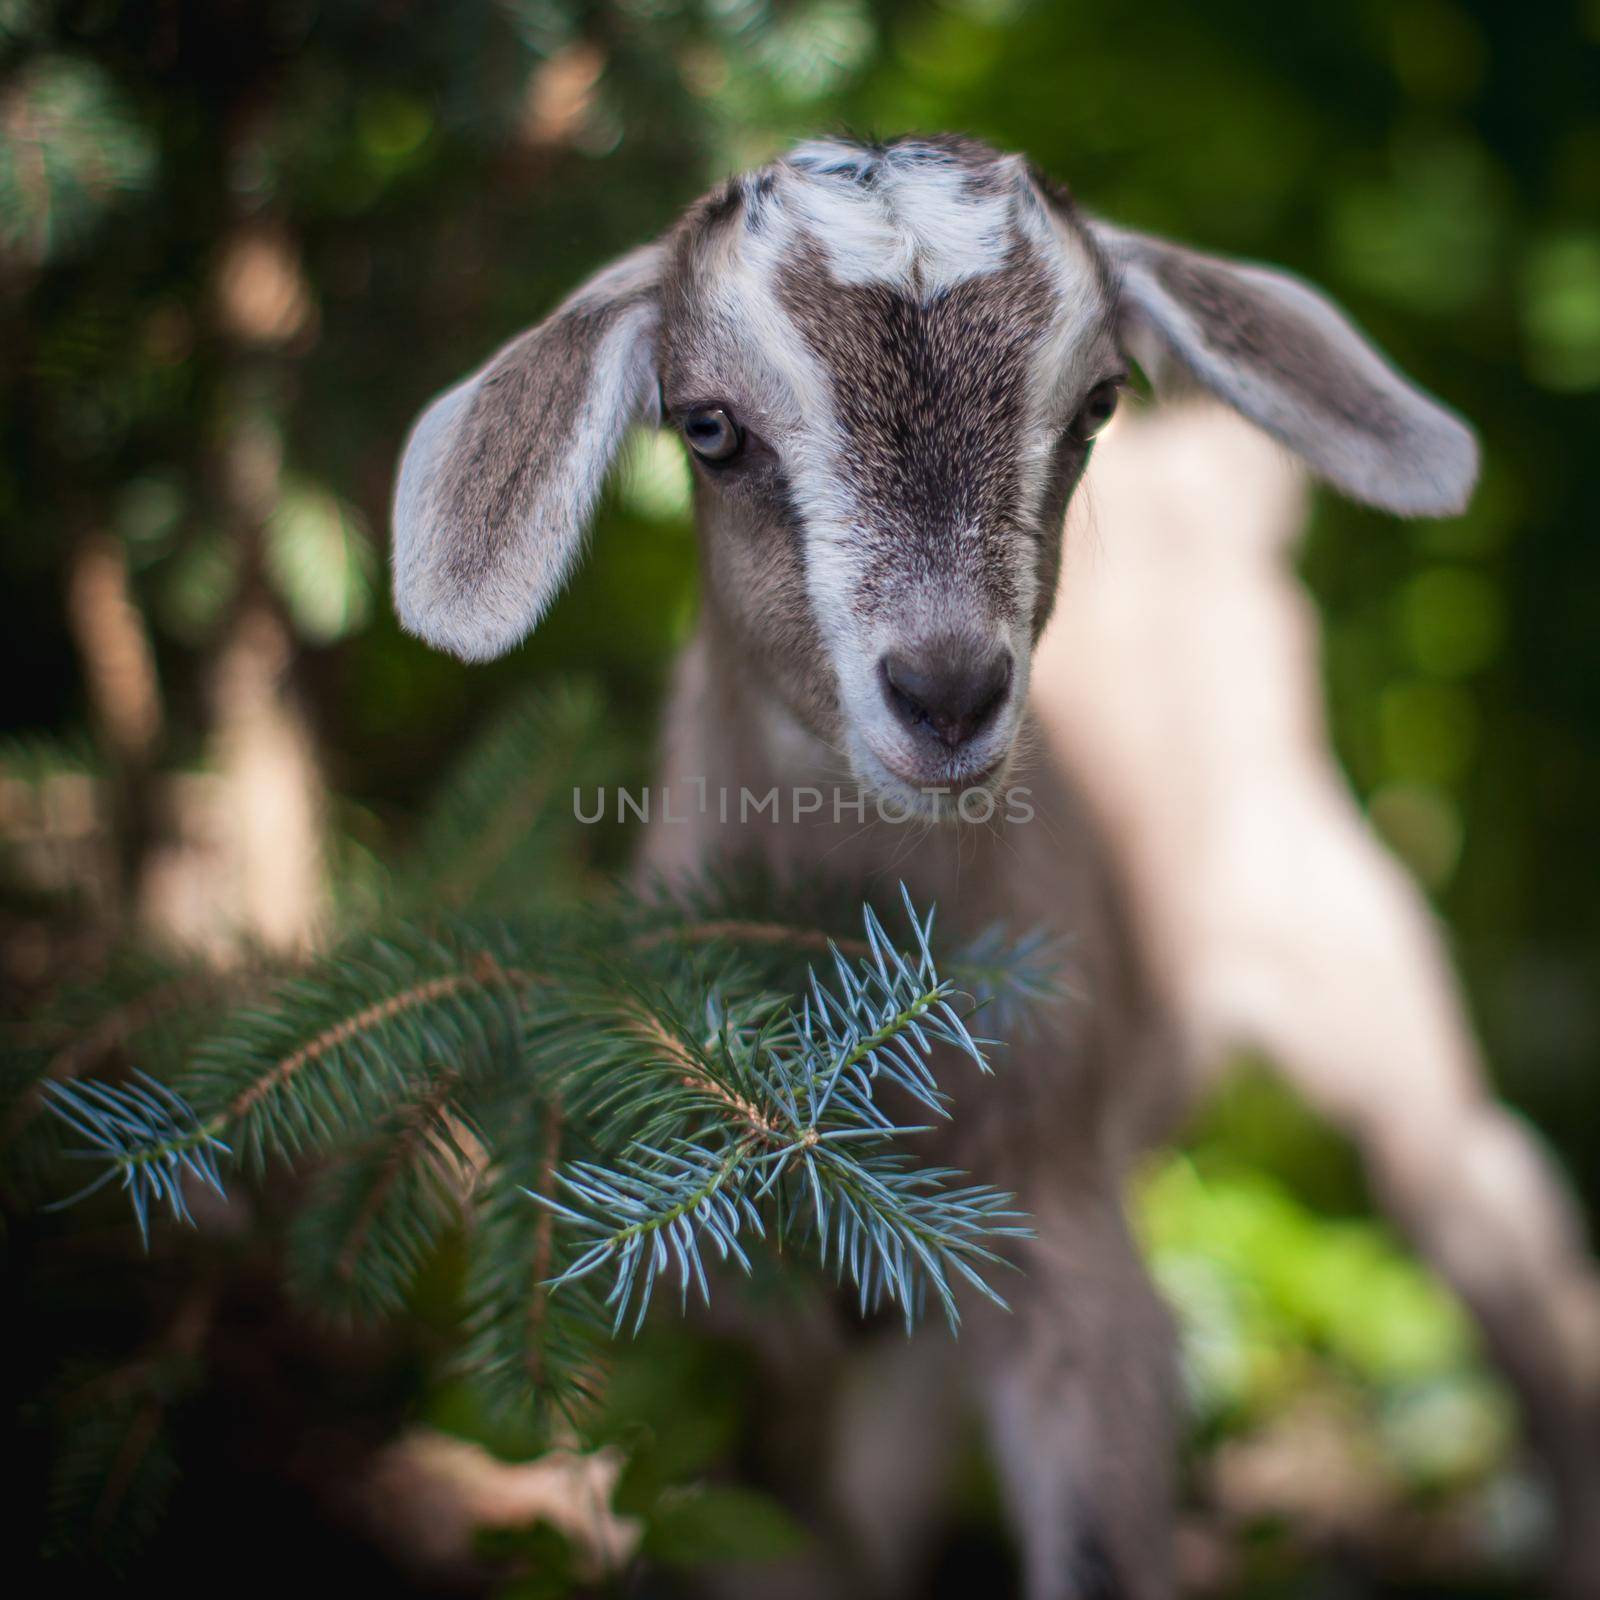 Cute young grey goatling in a garden by RosaJay